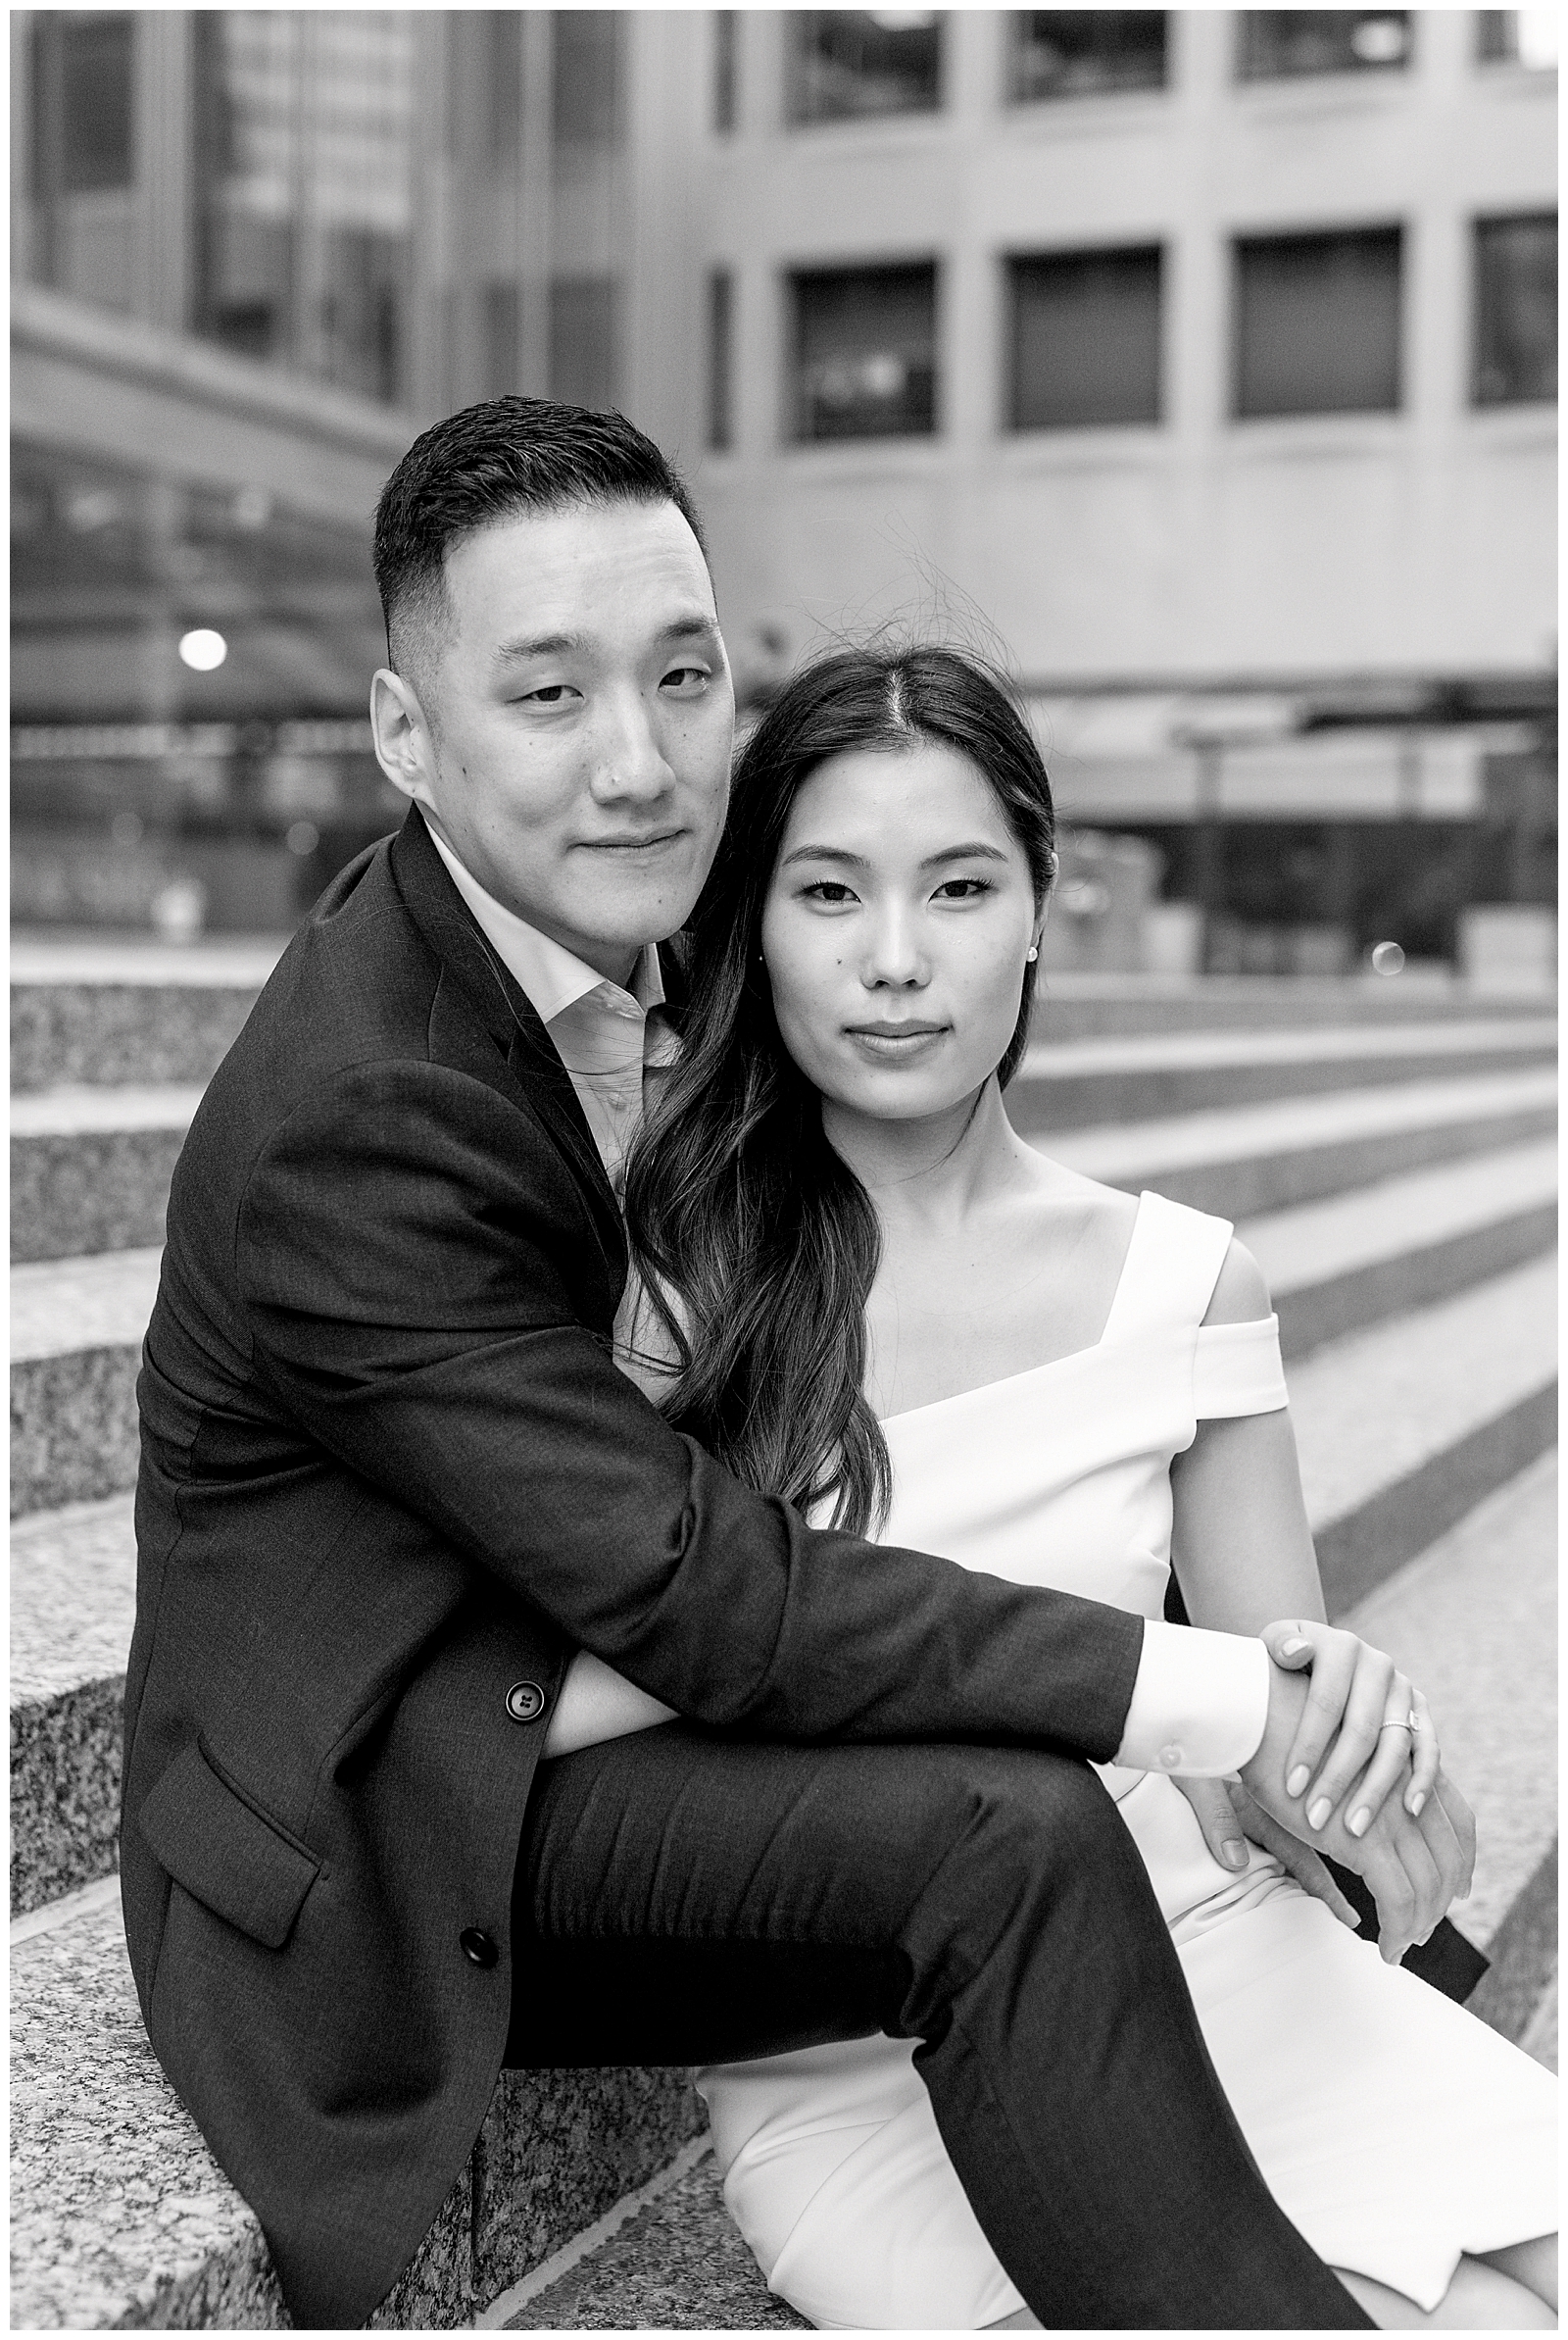 Downtown Toronto Financial District Engagement Session Modern Editorial Timeless Couple Portrait Meghan Markle | Toronto Wedding Photography Jacqueline James Photography